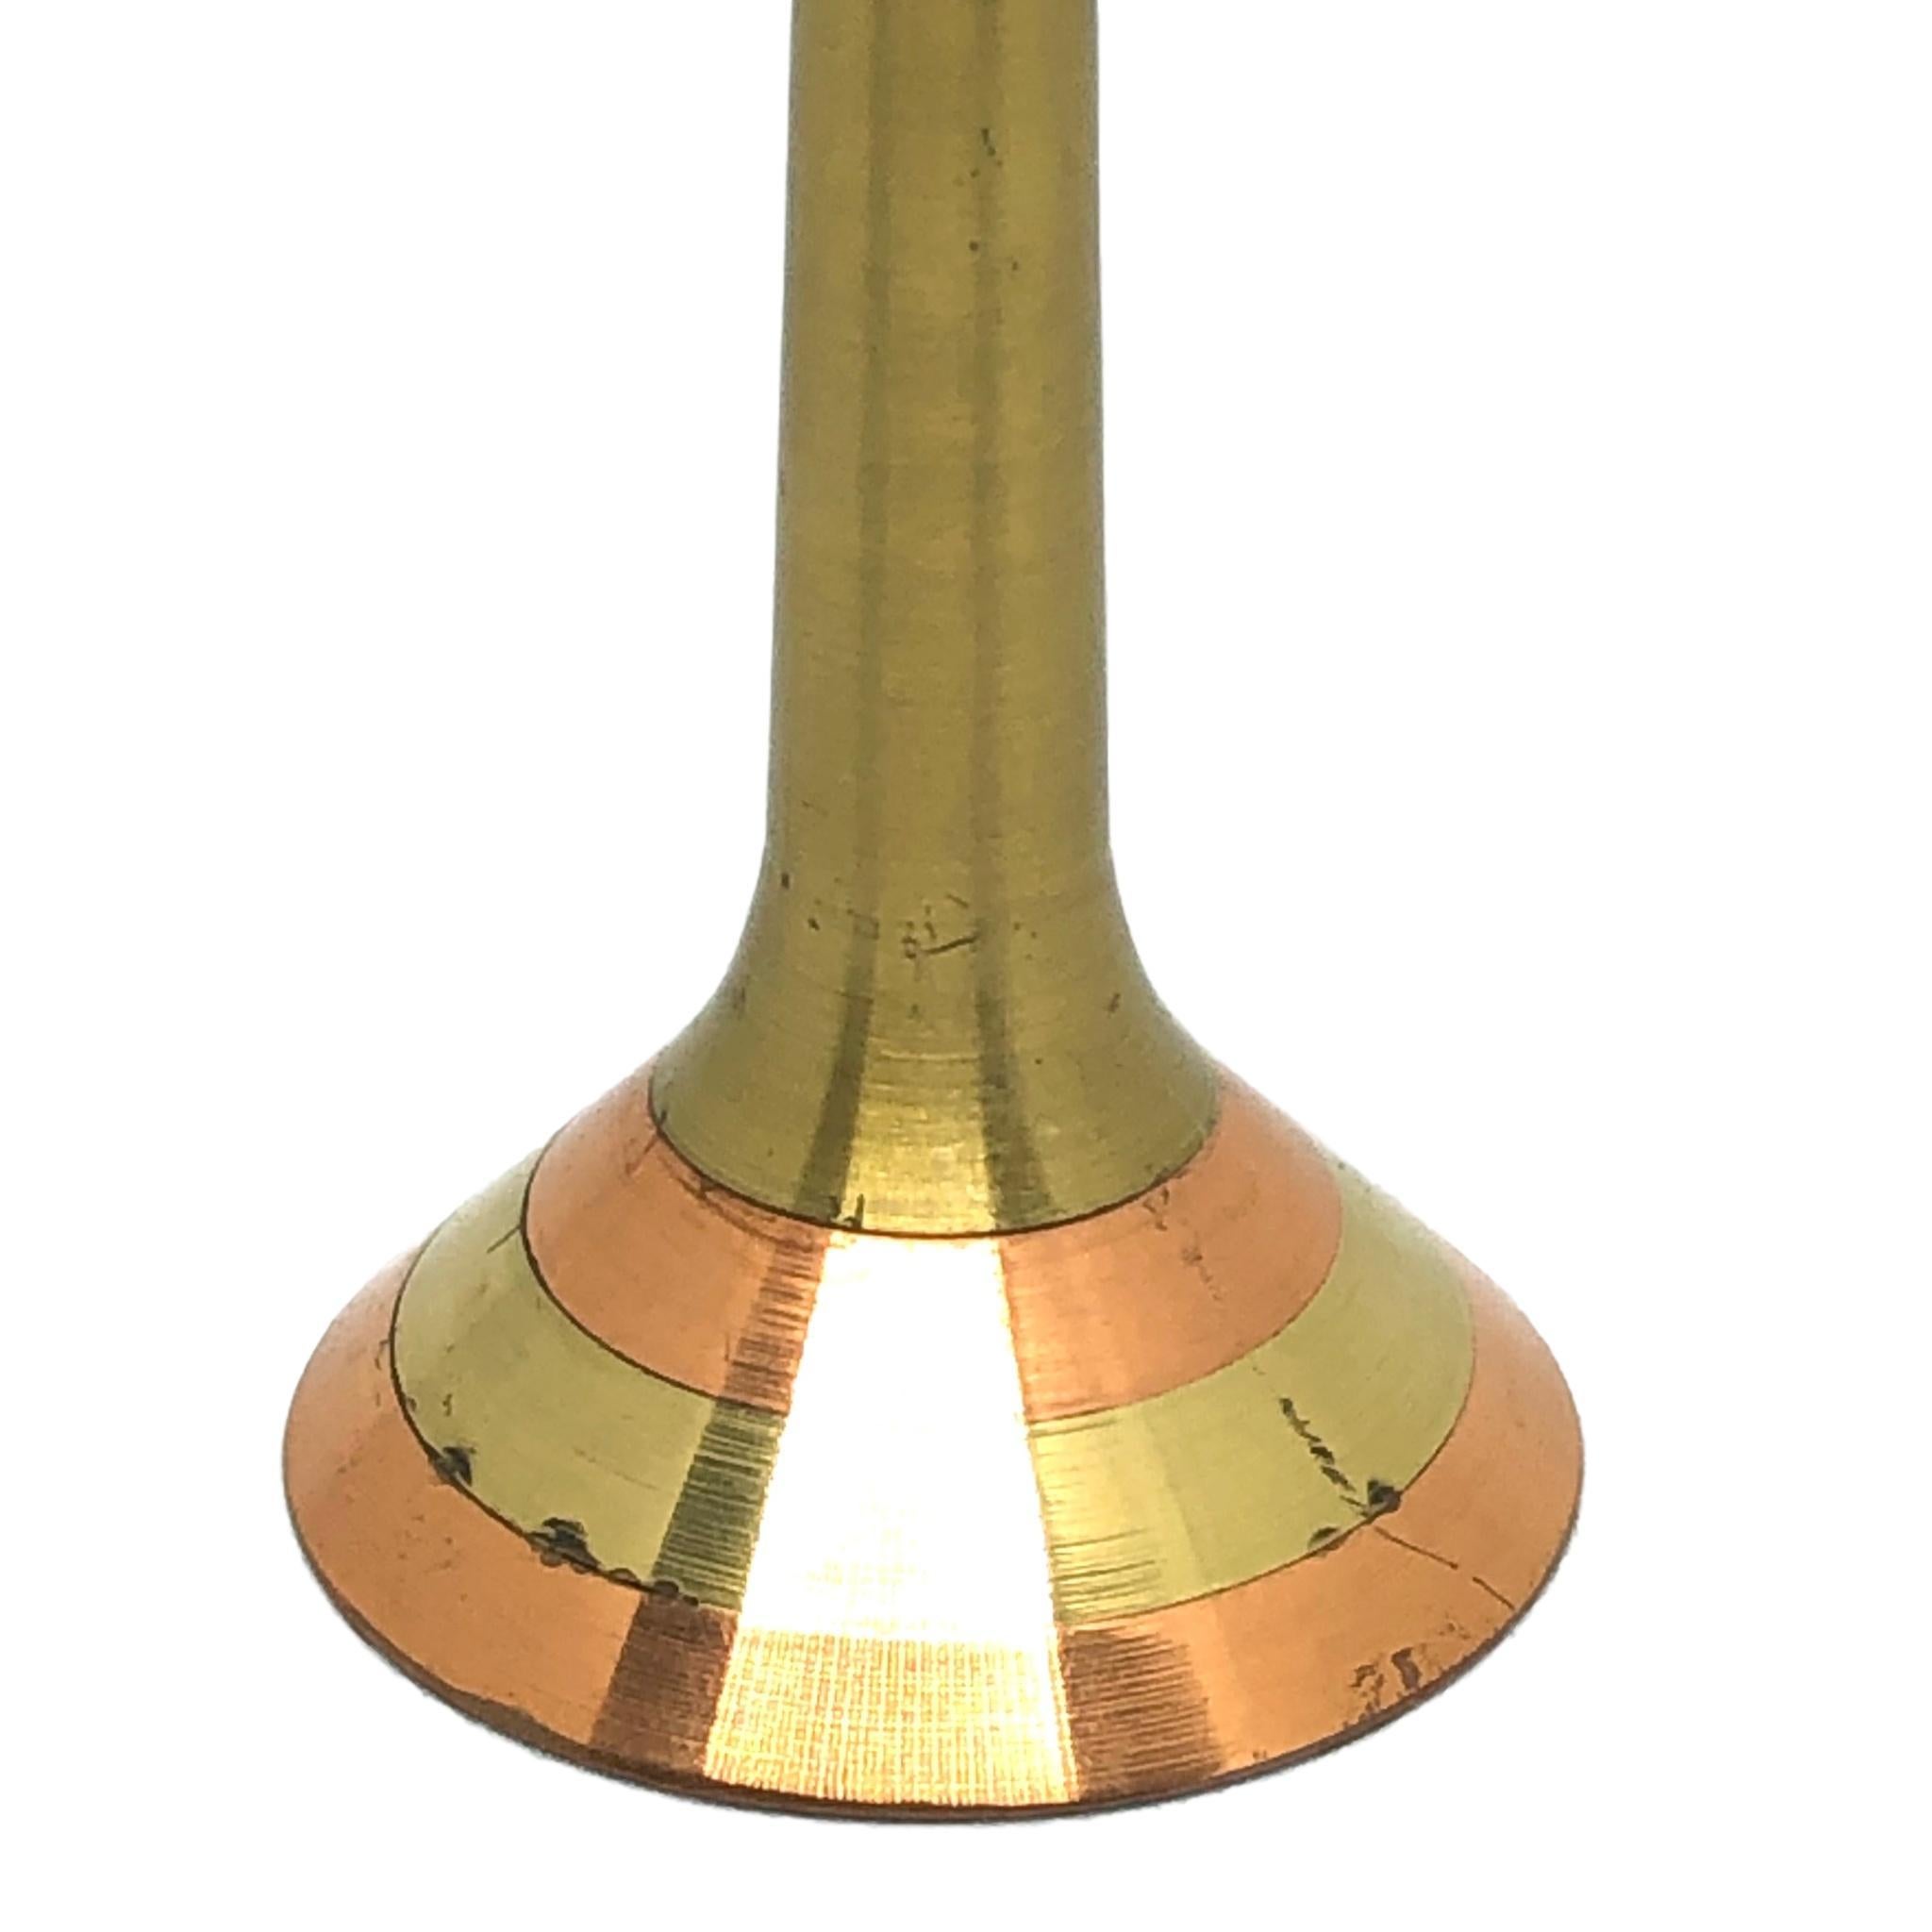 Hand-Crafted Berlin TV Television Tower Brass and Copper Scale Design Model, 1970s